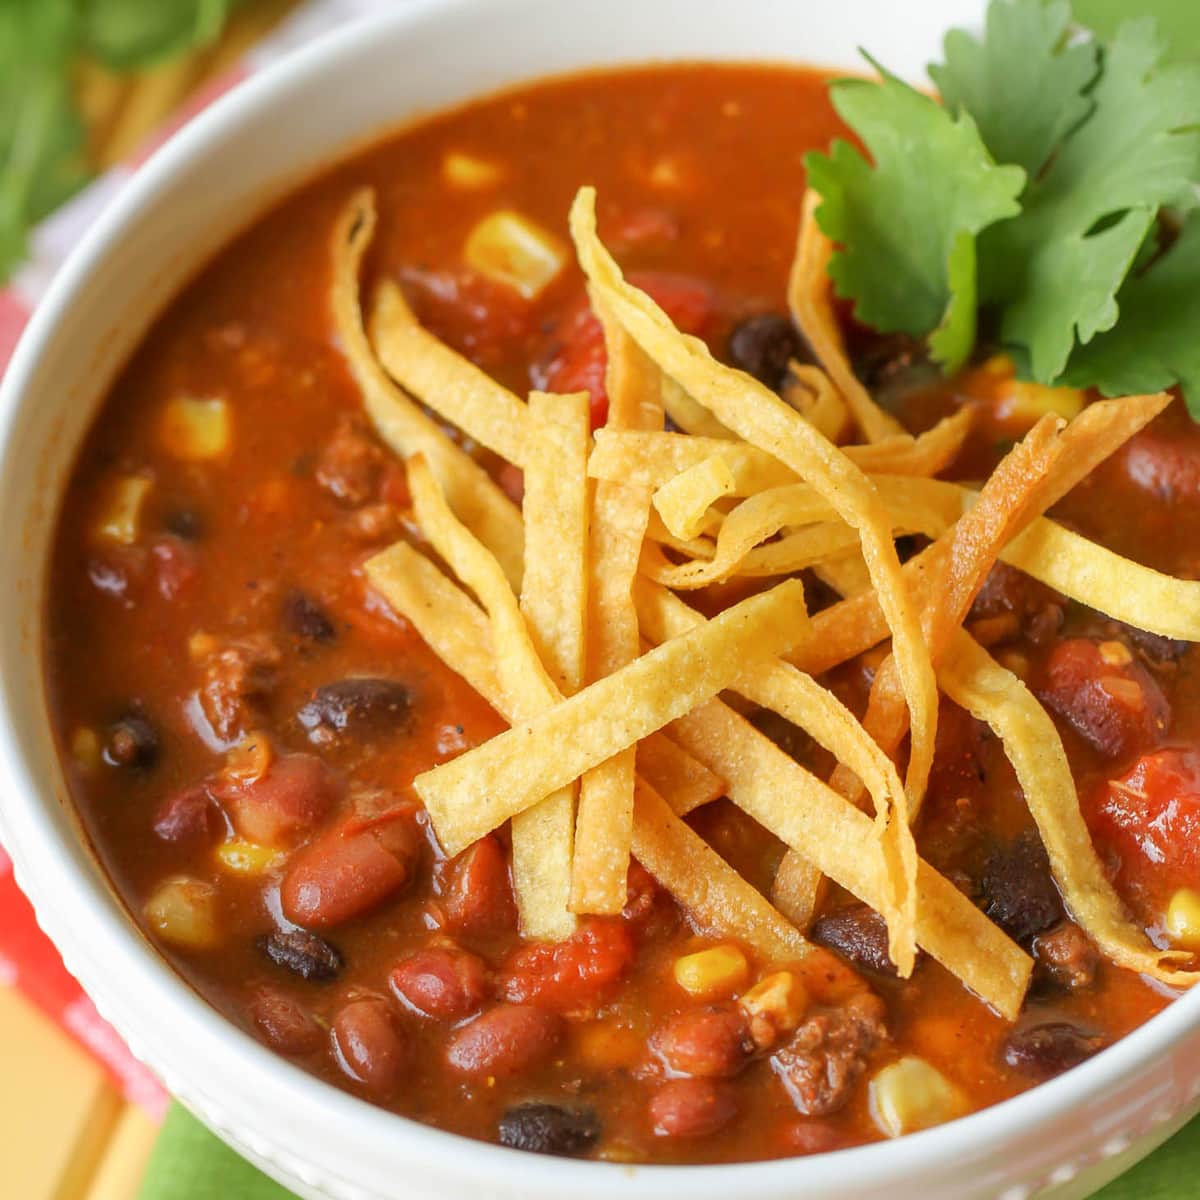 Quick dinner ideas - taco soup topped with tortilla strips.